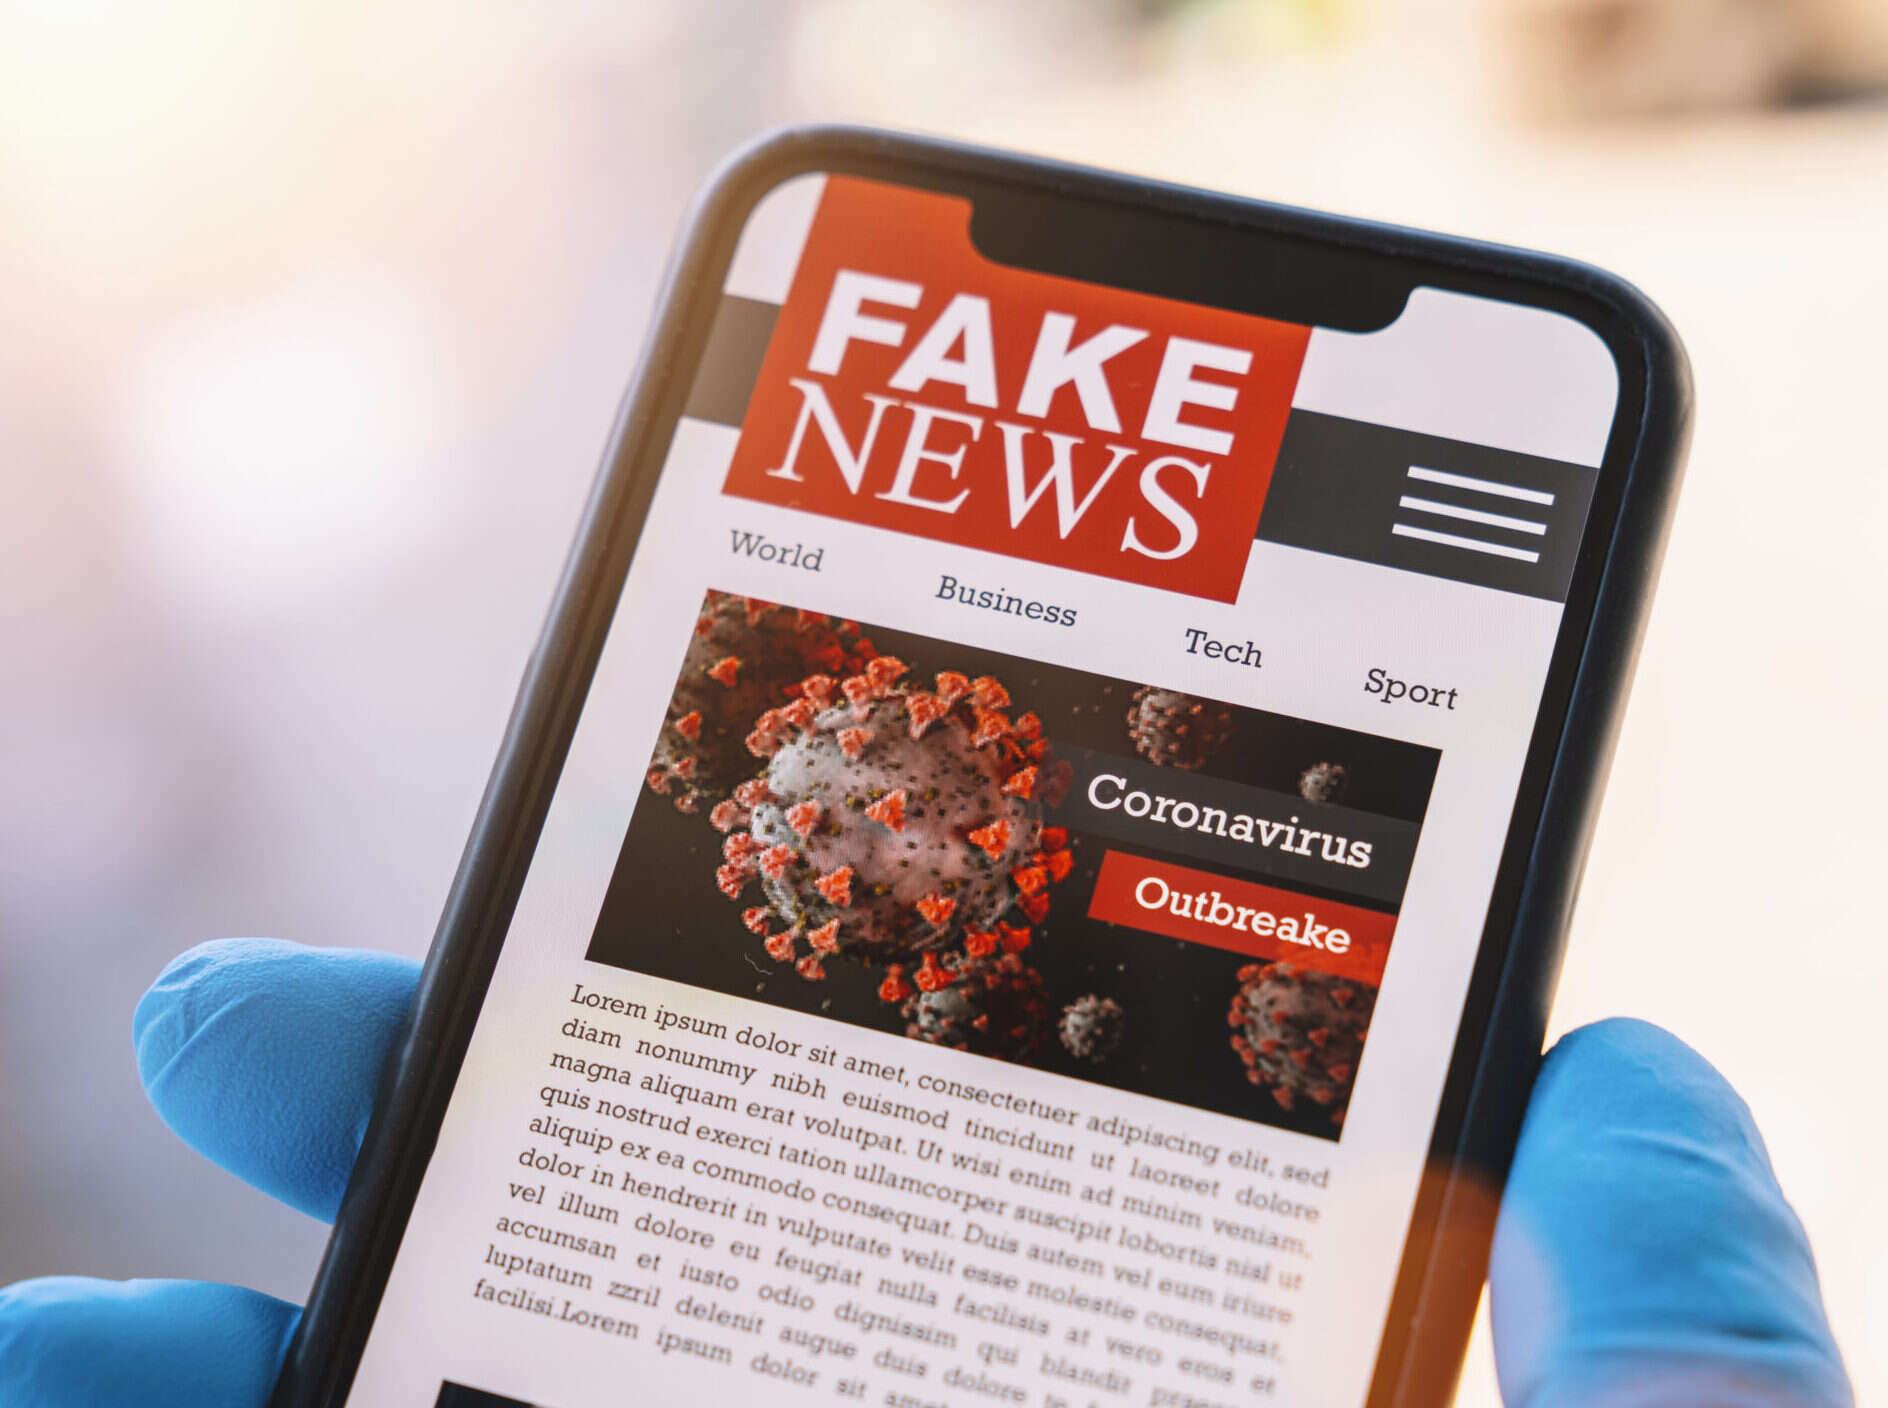 BBC Trusted News Initiative on how publishers can fight disinformation